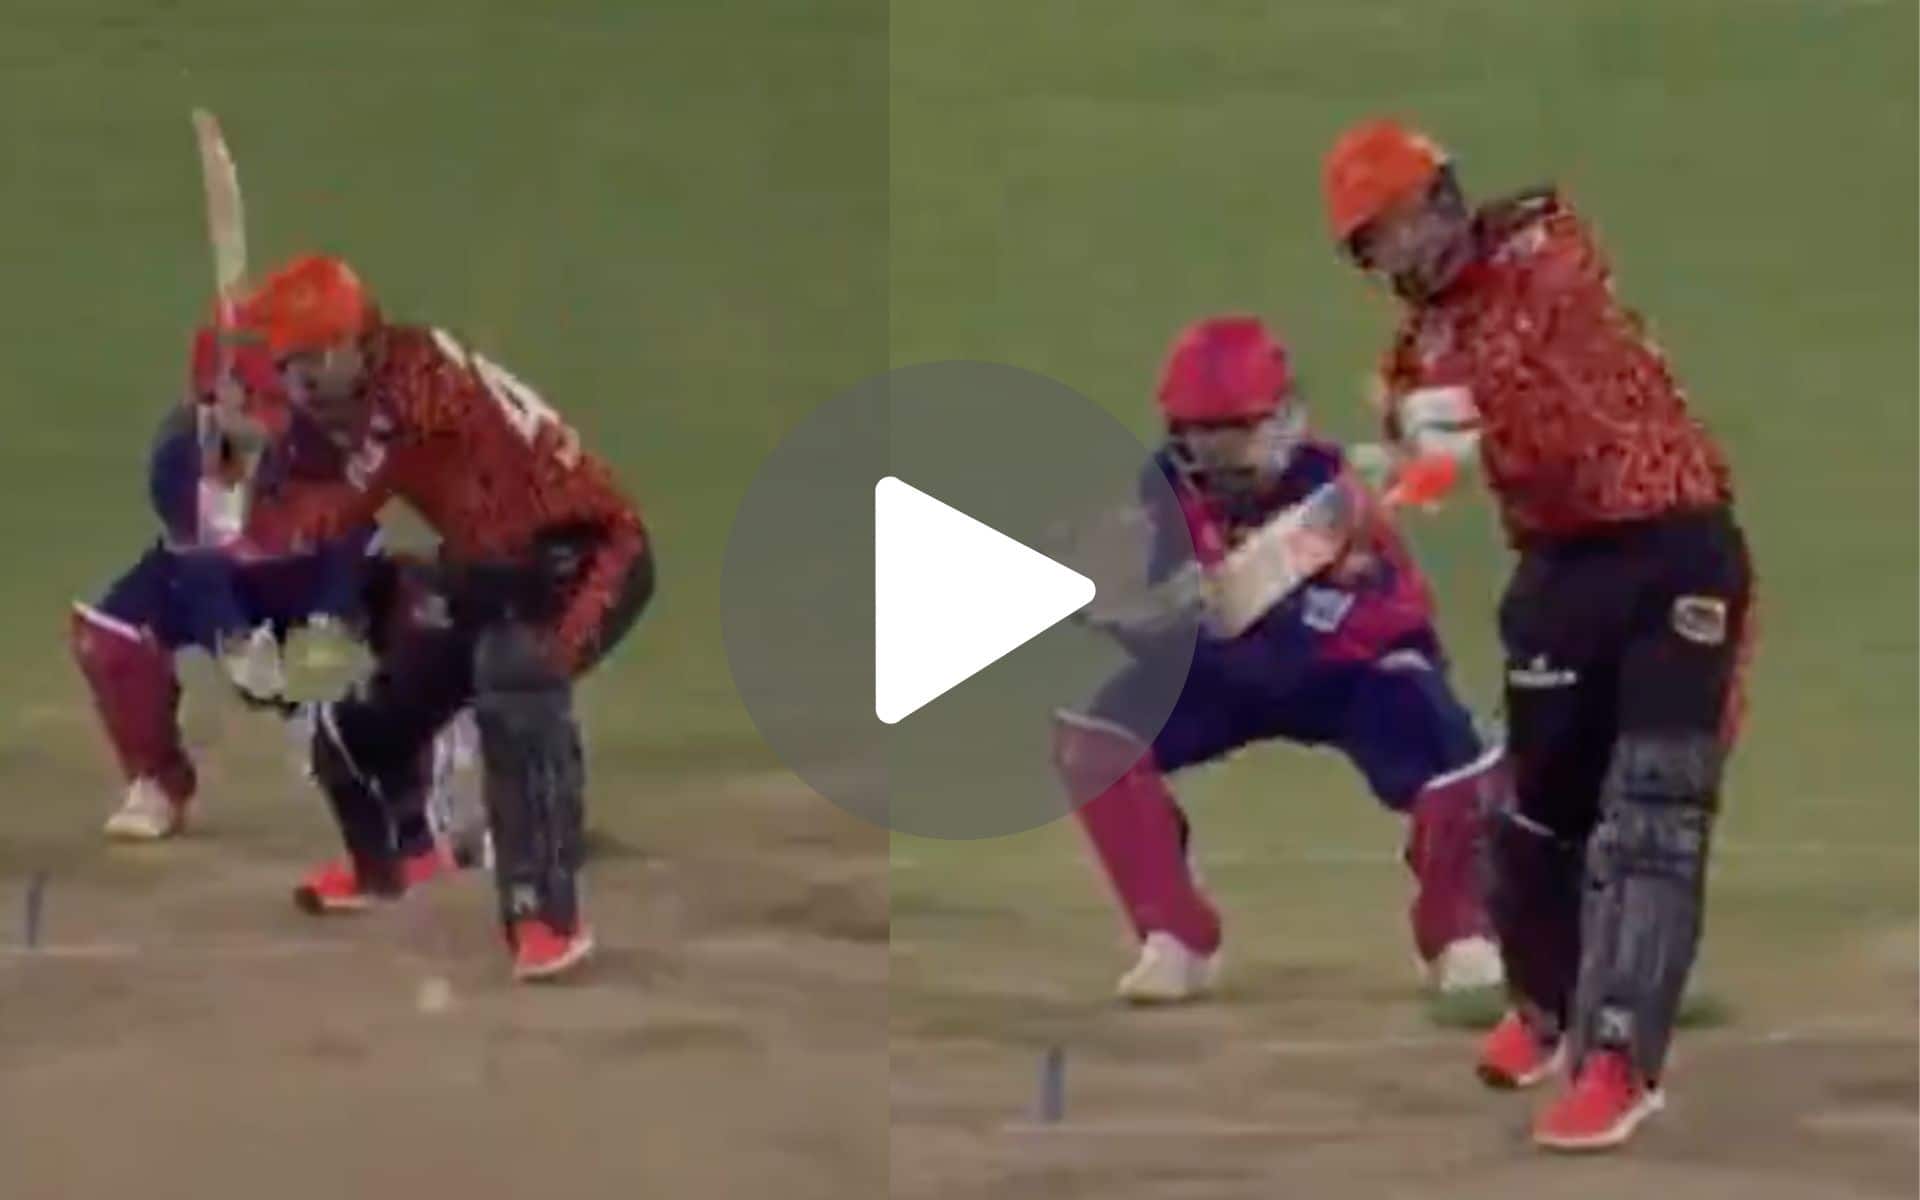 [Watch] Heinrich Klaasen Destroys Chahal With Back-To-Back Sixes In A Sea Of Orange